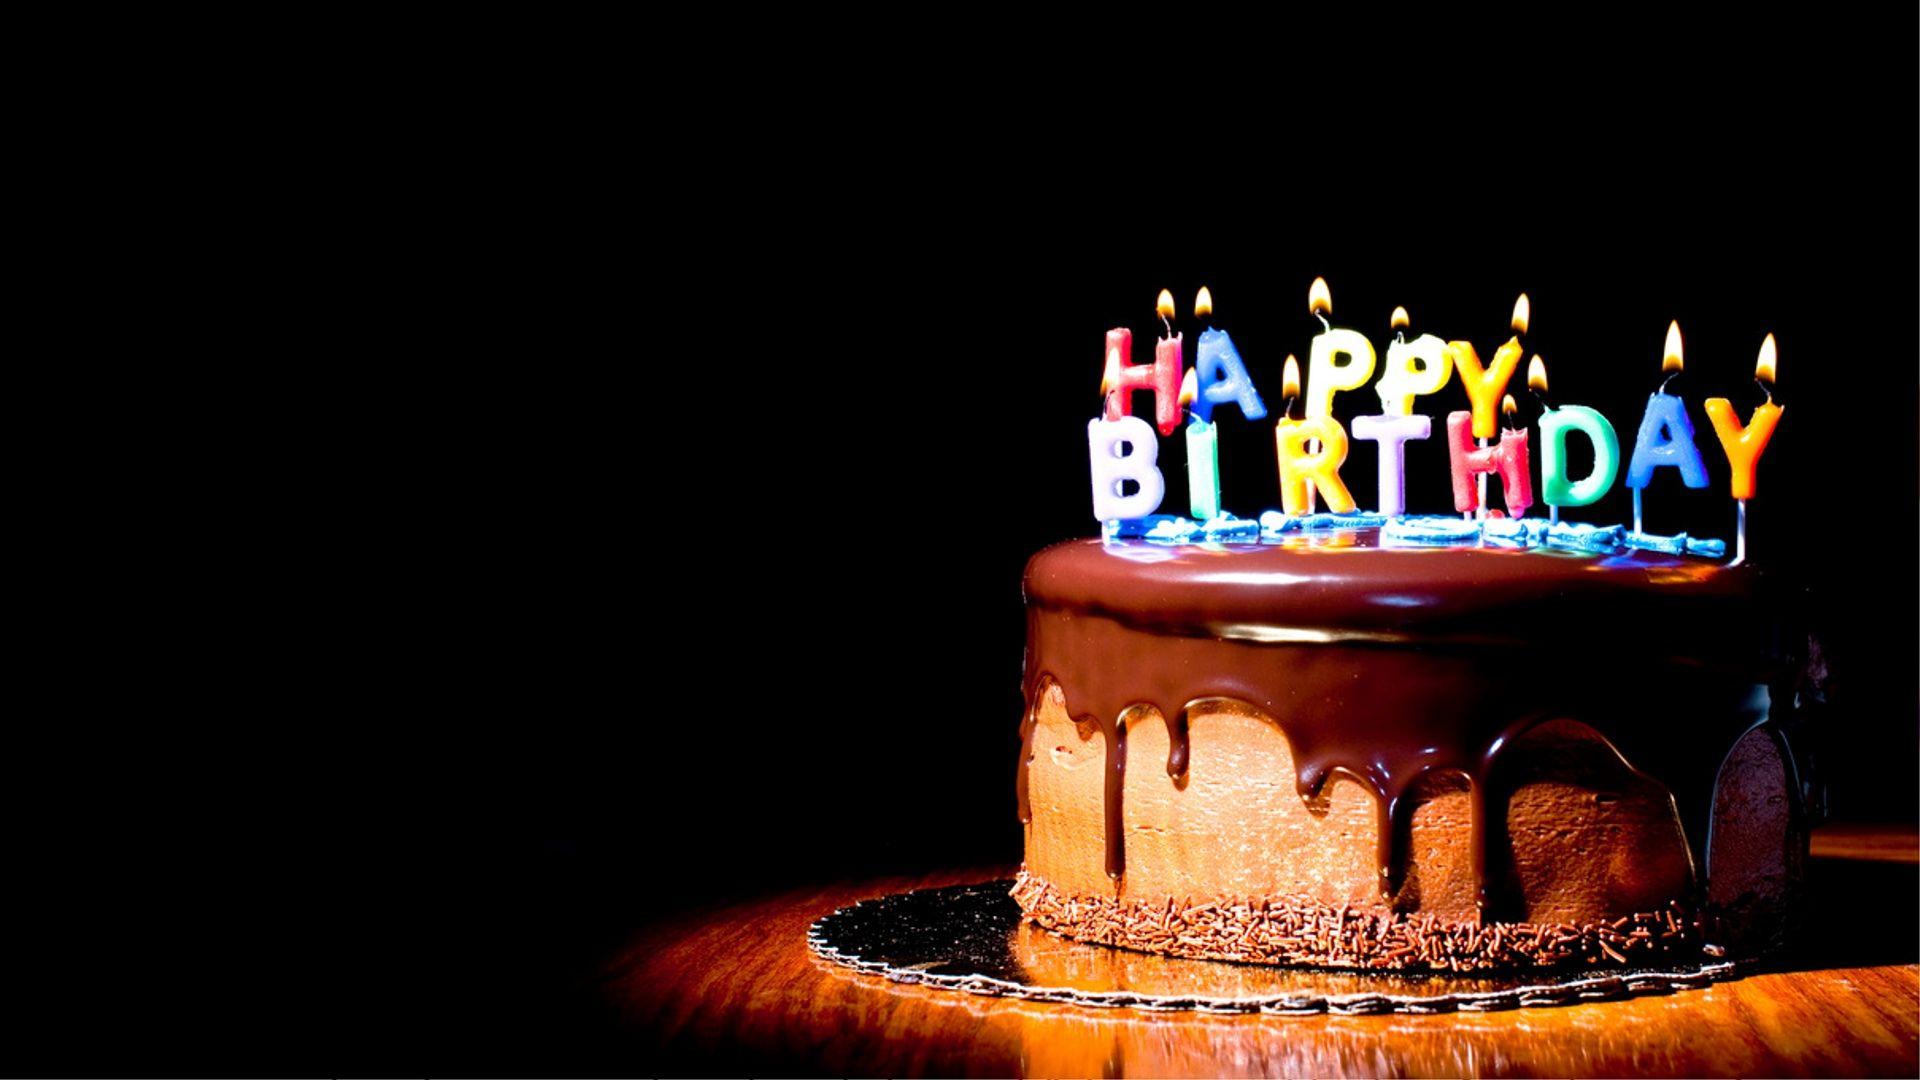 Birthday Cakes HD Wallpaper, Backgrounds Image.